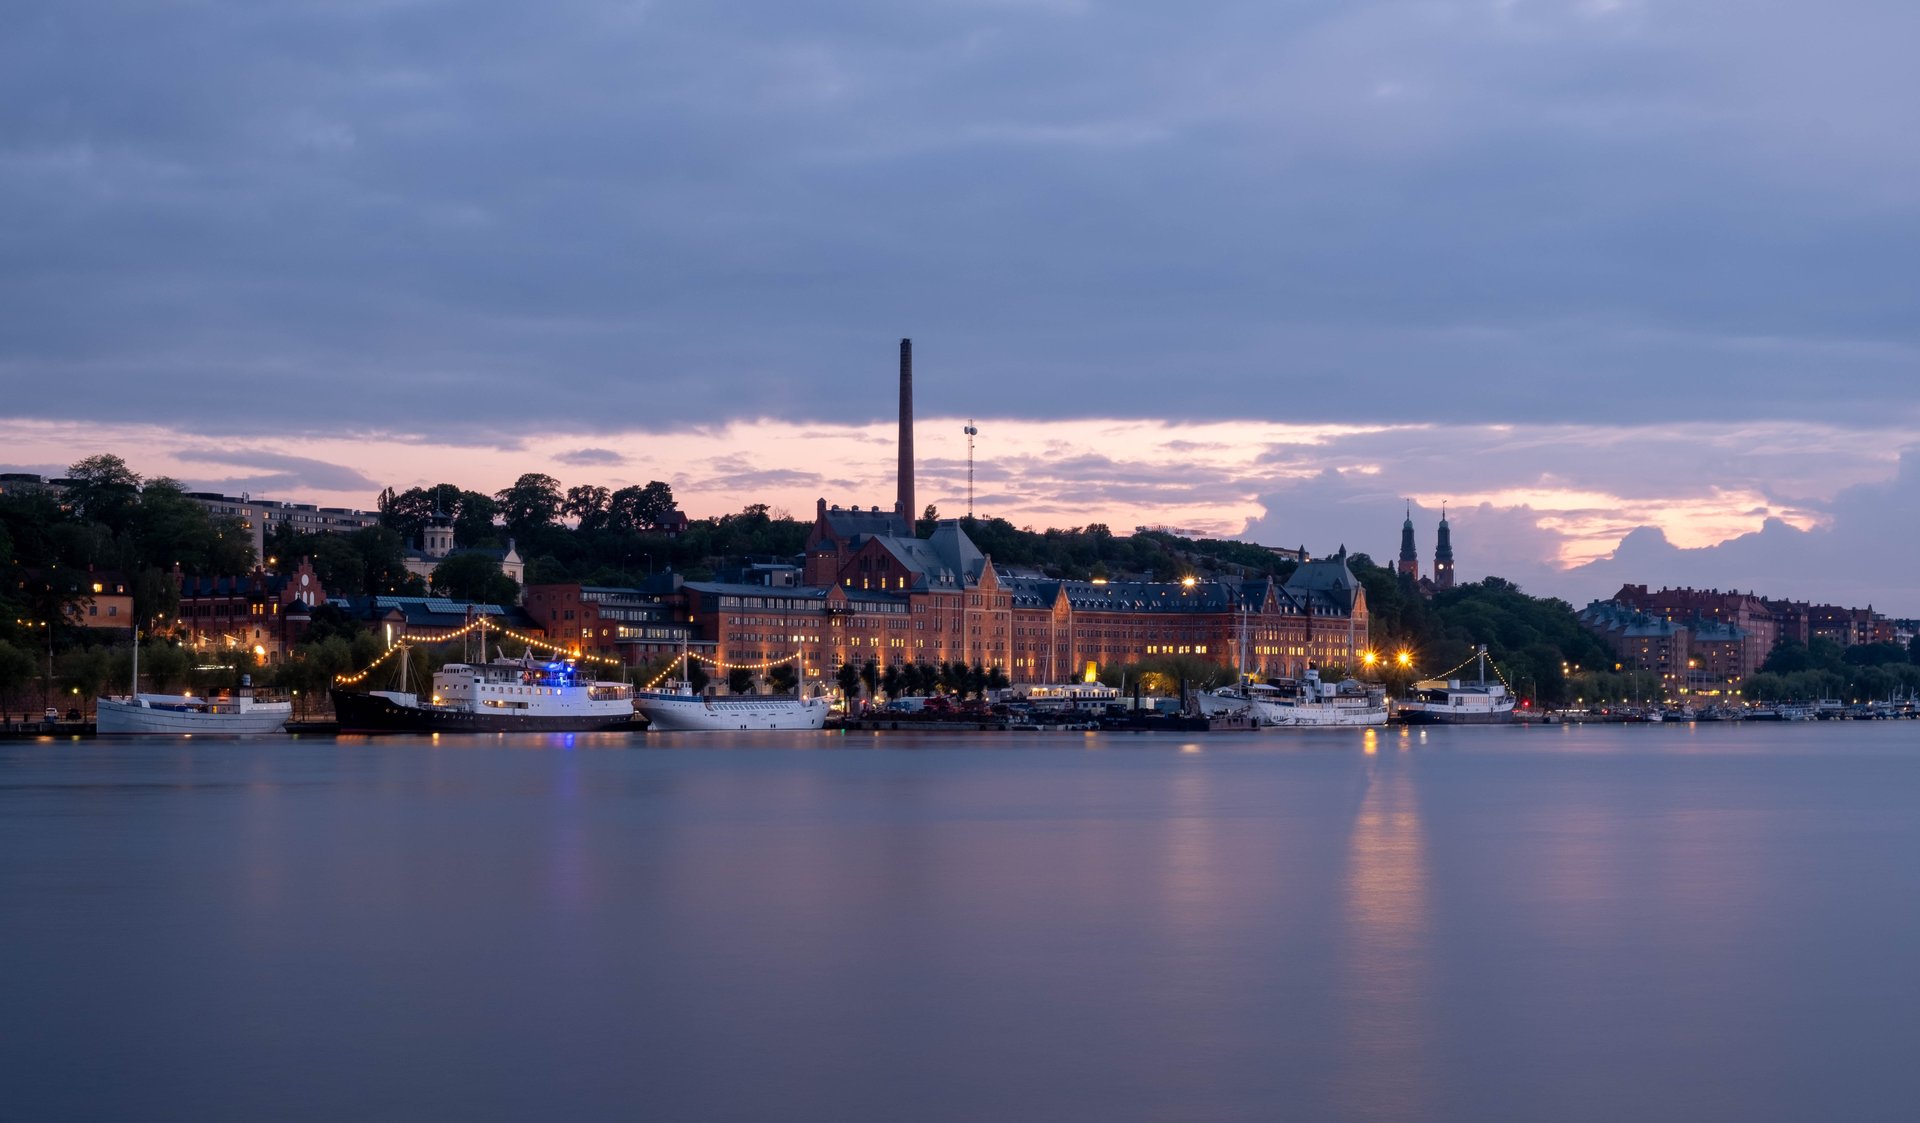 A backpackers guide to enjoying Sweden's capital of Stockholm